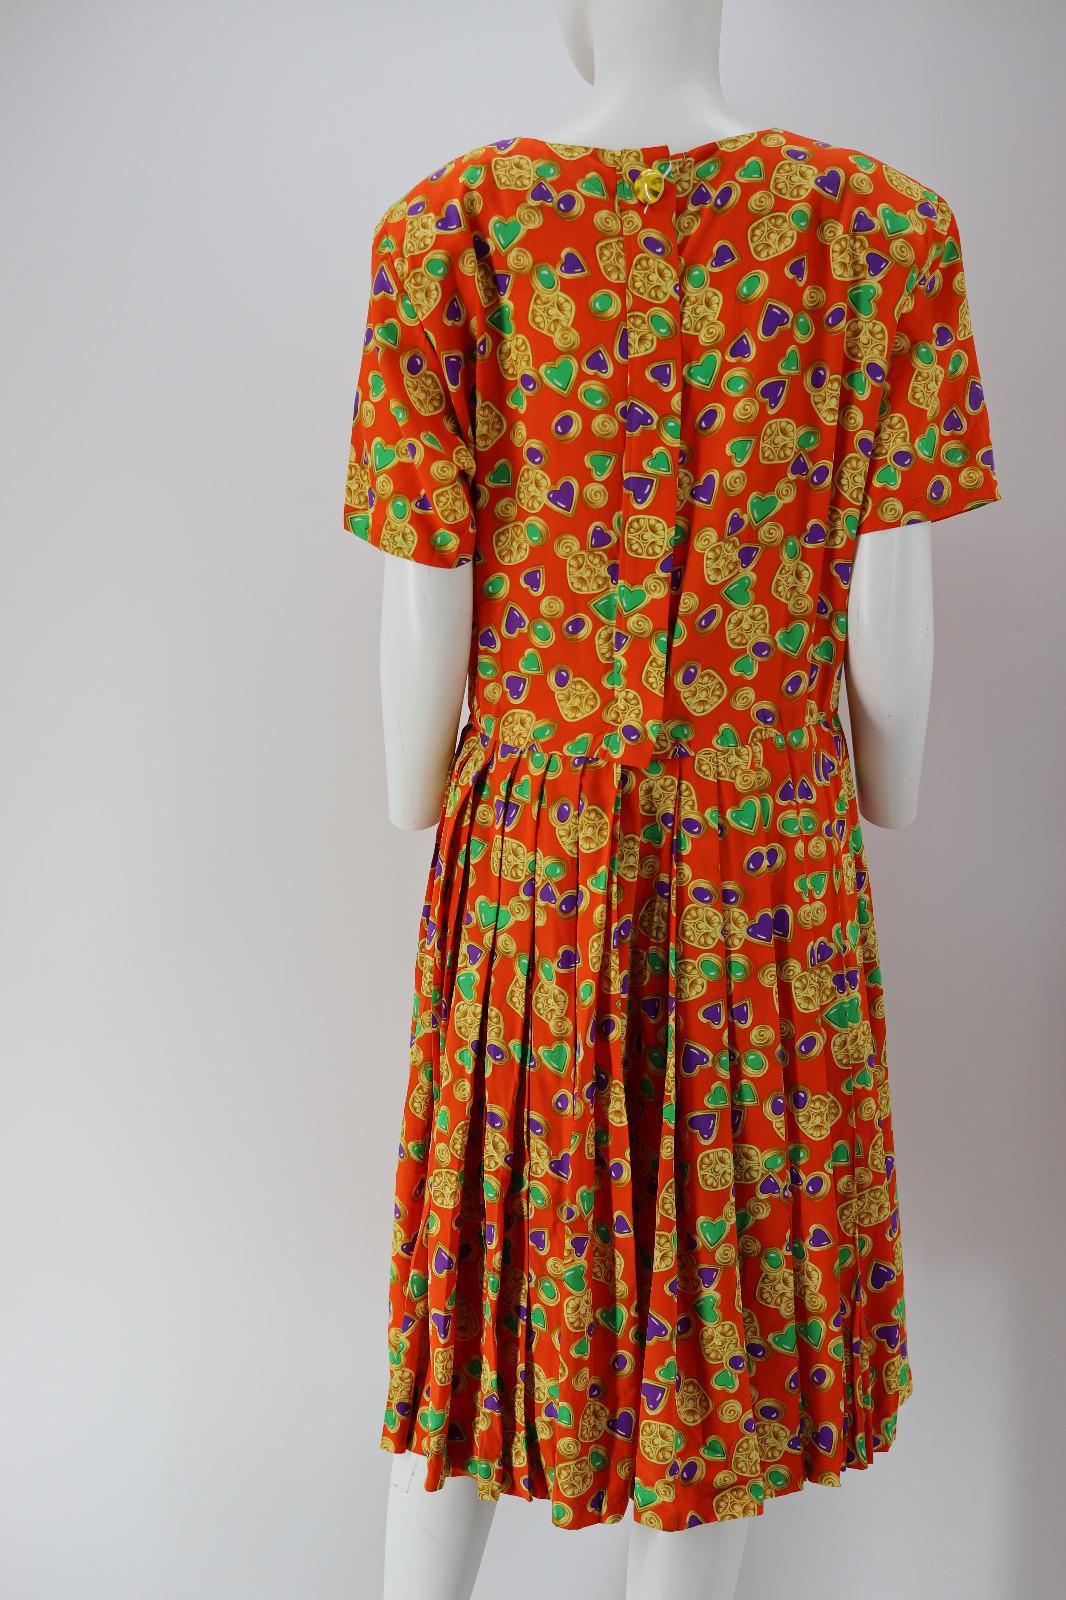 Yves Saint Laurent Heart And Jewelry Design Dress


- V-neck short sleeve dress
- Orange, yellow, purple and green colours
- Pleated effect at the bottom of the dress
- Heart and jewel pattern

Shoulders: 40 cm
Length: 100,9 cm

Shipping costs